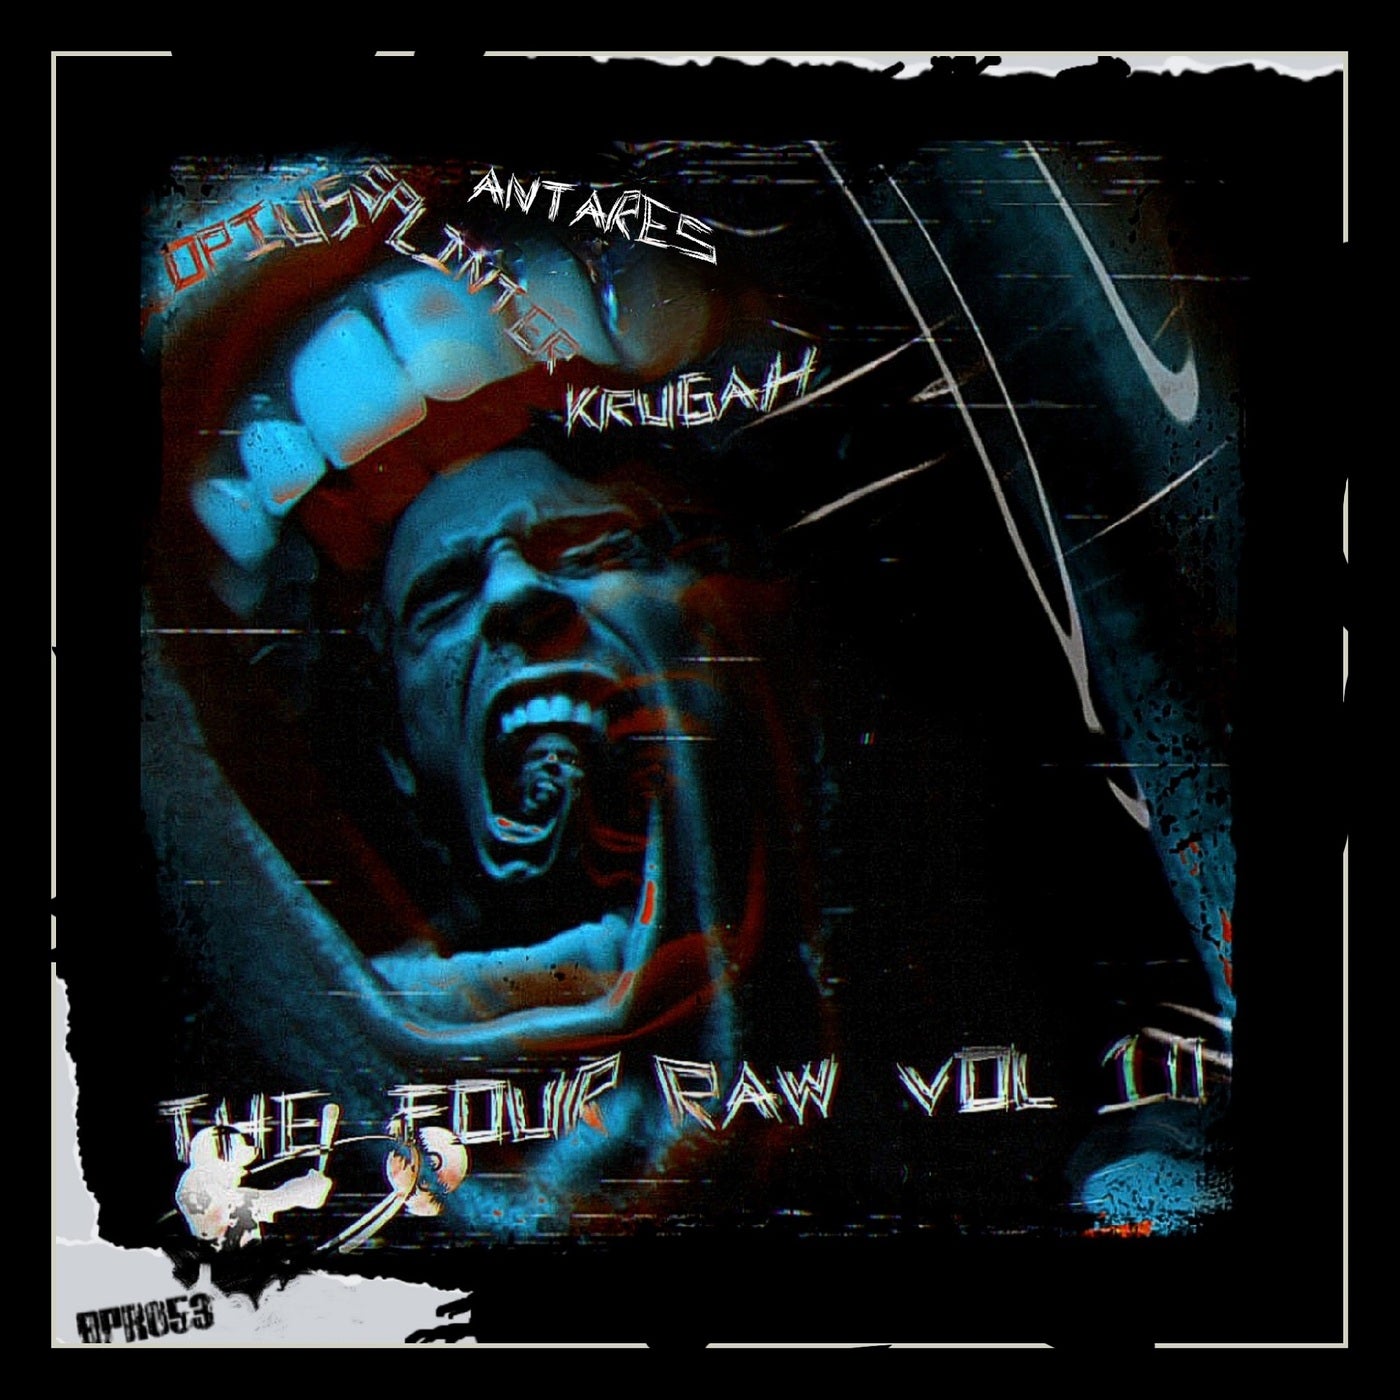 The Four Raw Vol 10